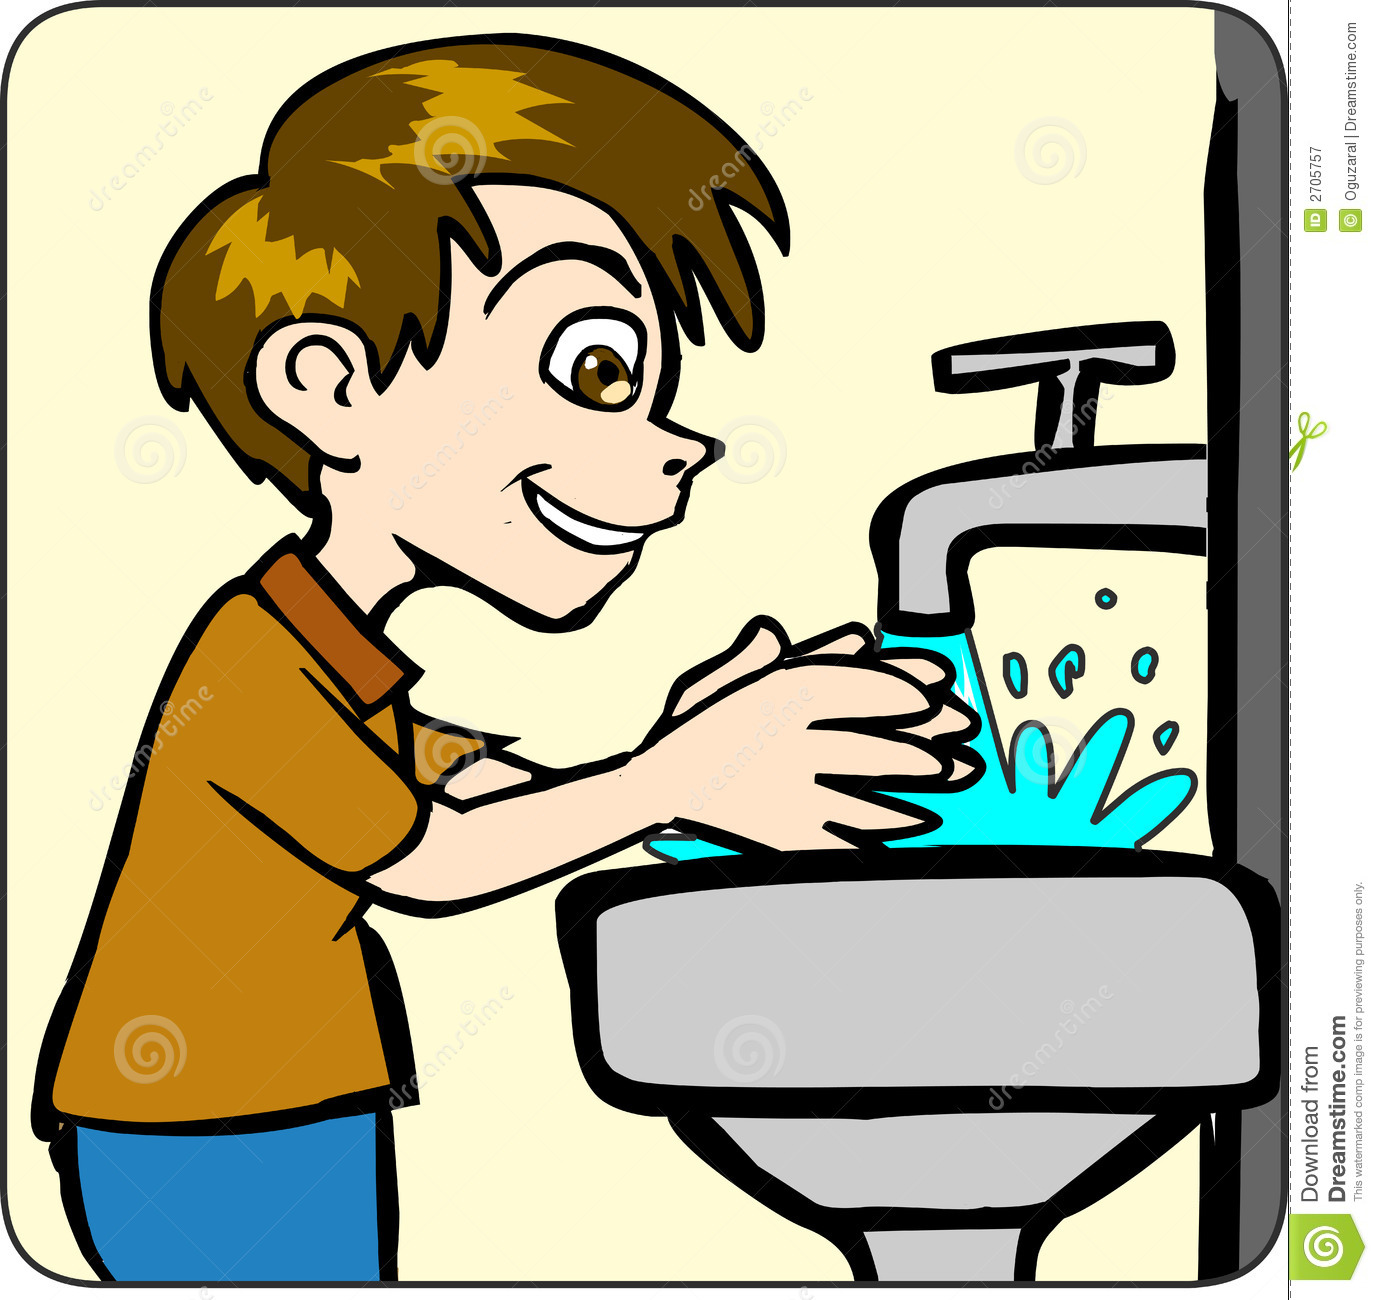 wash-my-face-and-hands-clip-art-library